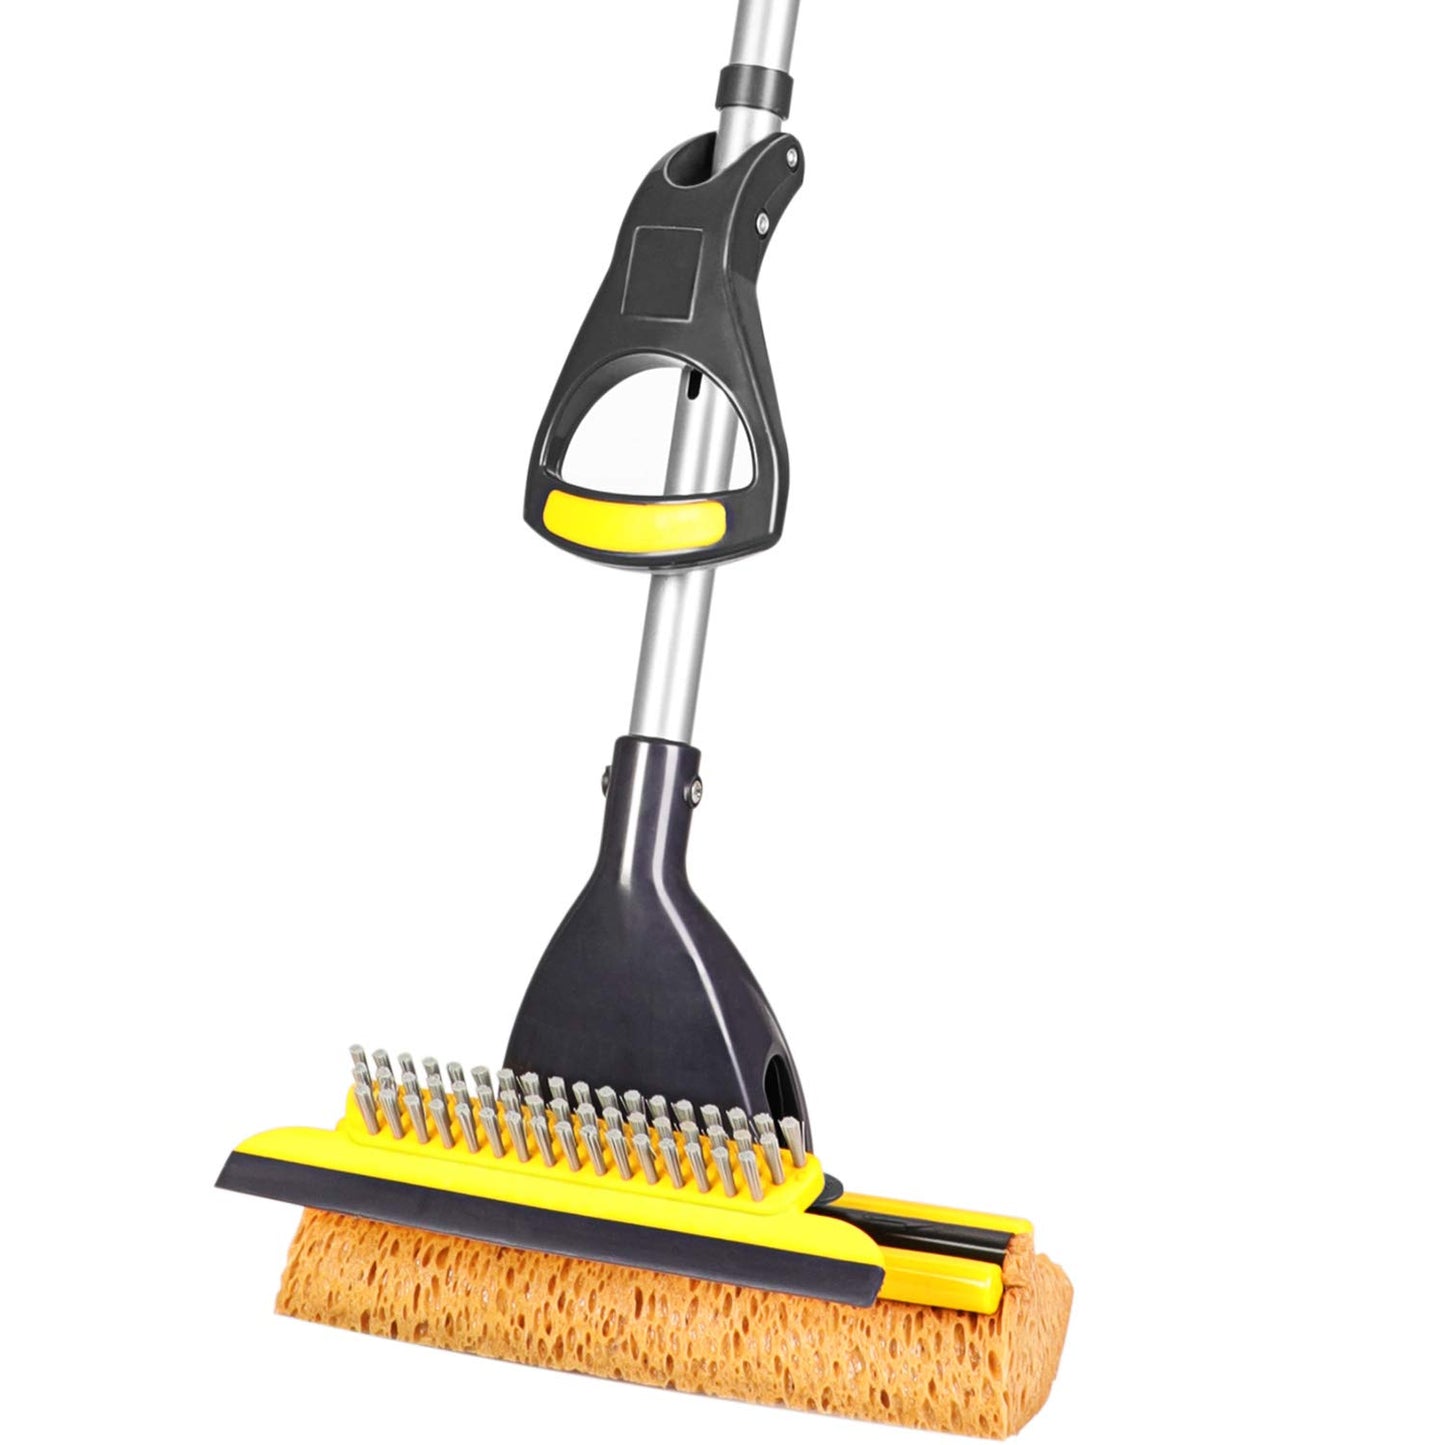 Yocada Sponge Mop Home Commercial Use Tile Floor Bathroom Garage Cleaning  with Squeegee and Extendable Telescopic Long Handle 41-53 Inches Easily Dry